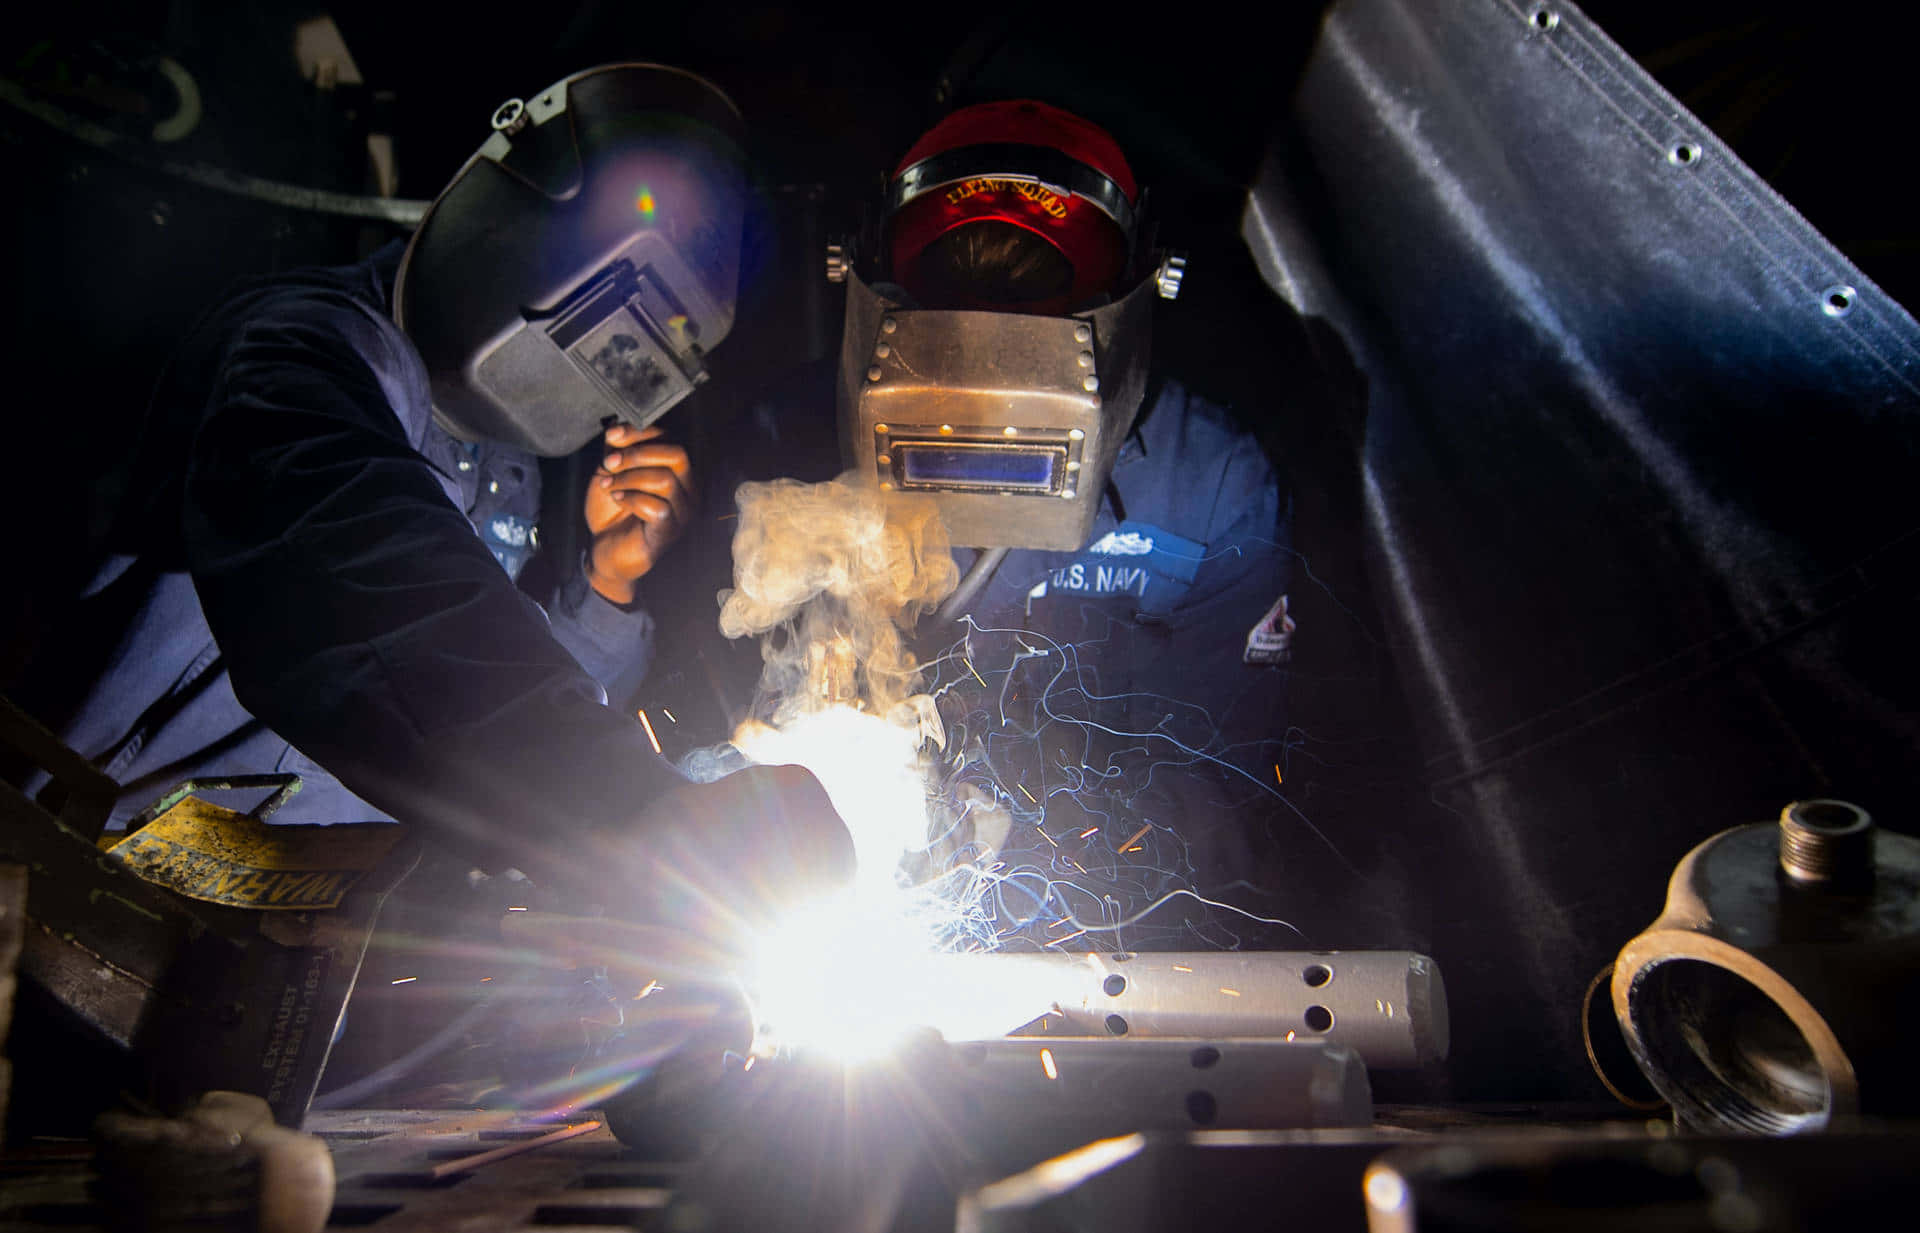 Two Welders Working On A Metal Piece Background